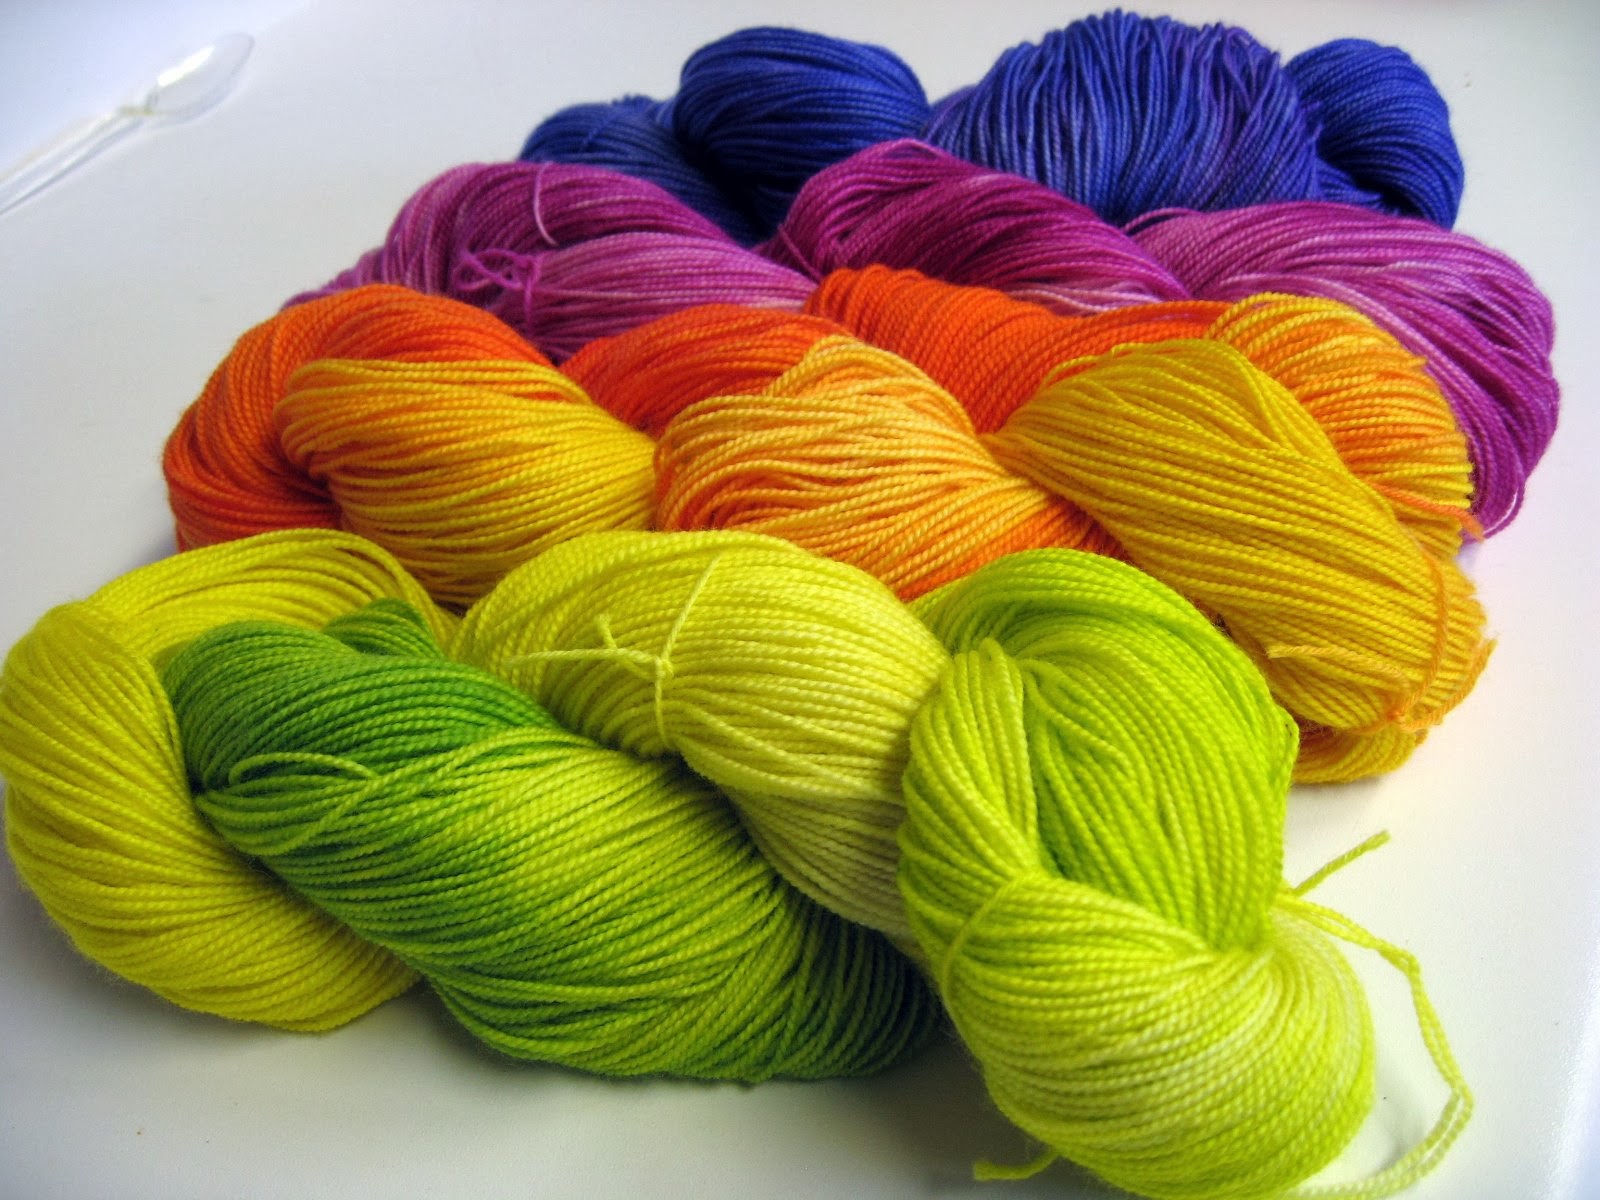 Textile Fiber, Yarn Spinning, Woven and Knit Fabric, Dyeing, Garments